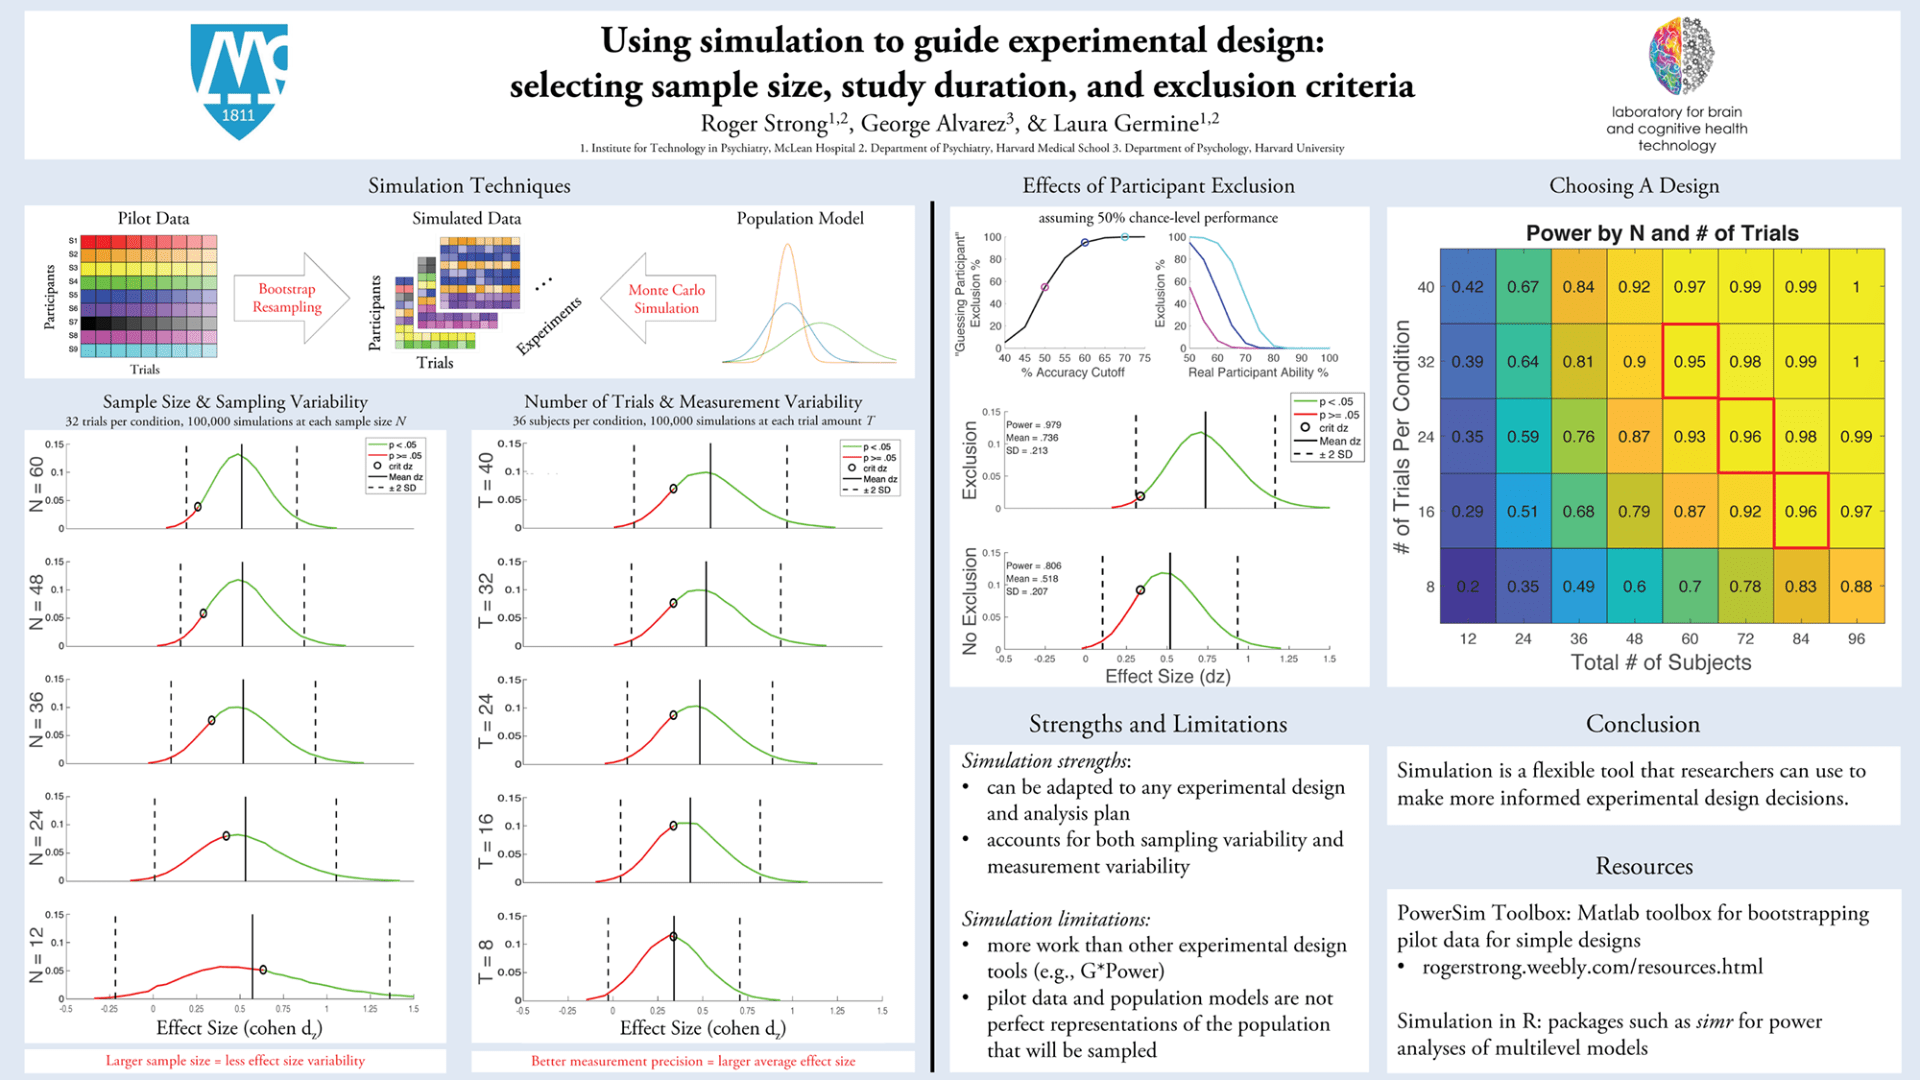 Using simulation to guide experimental design: selecting sample size, study duration, and exclusion criteria